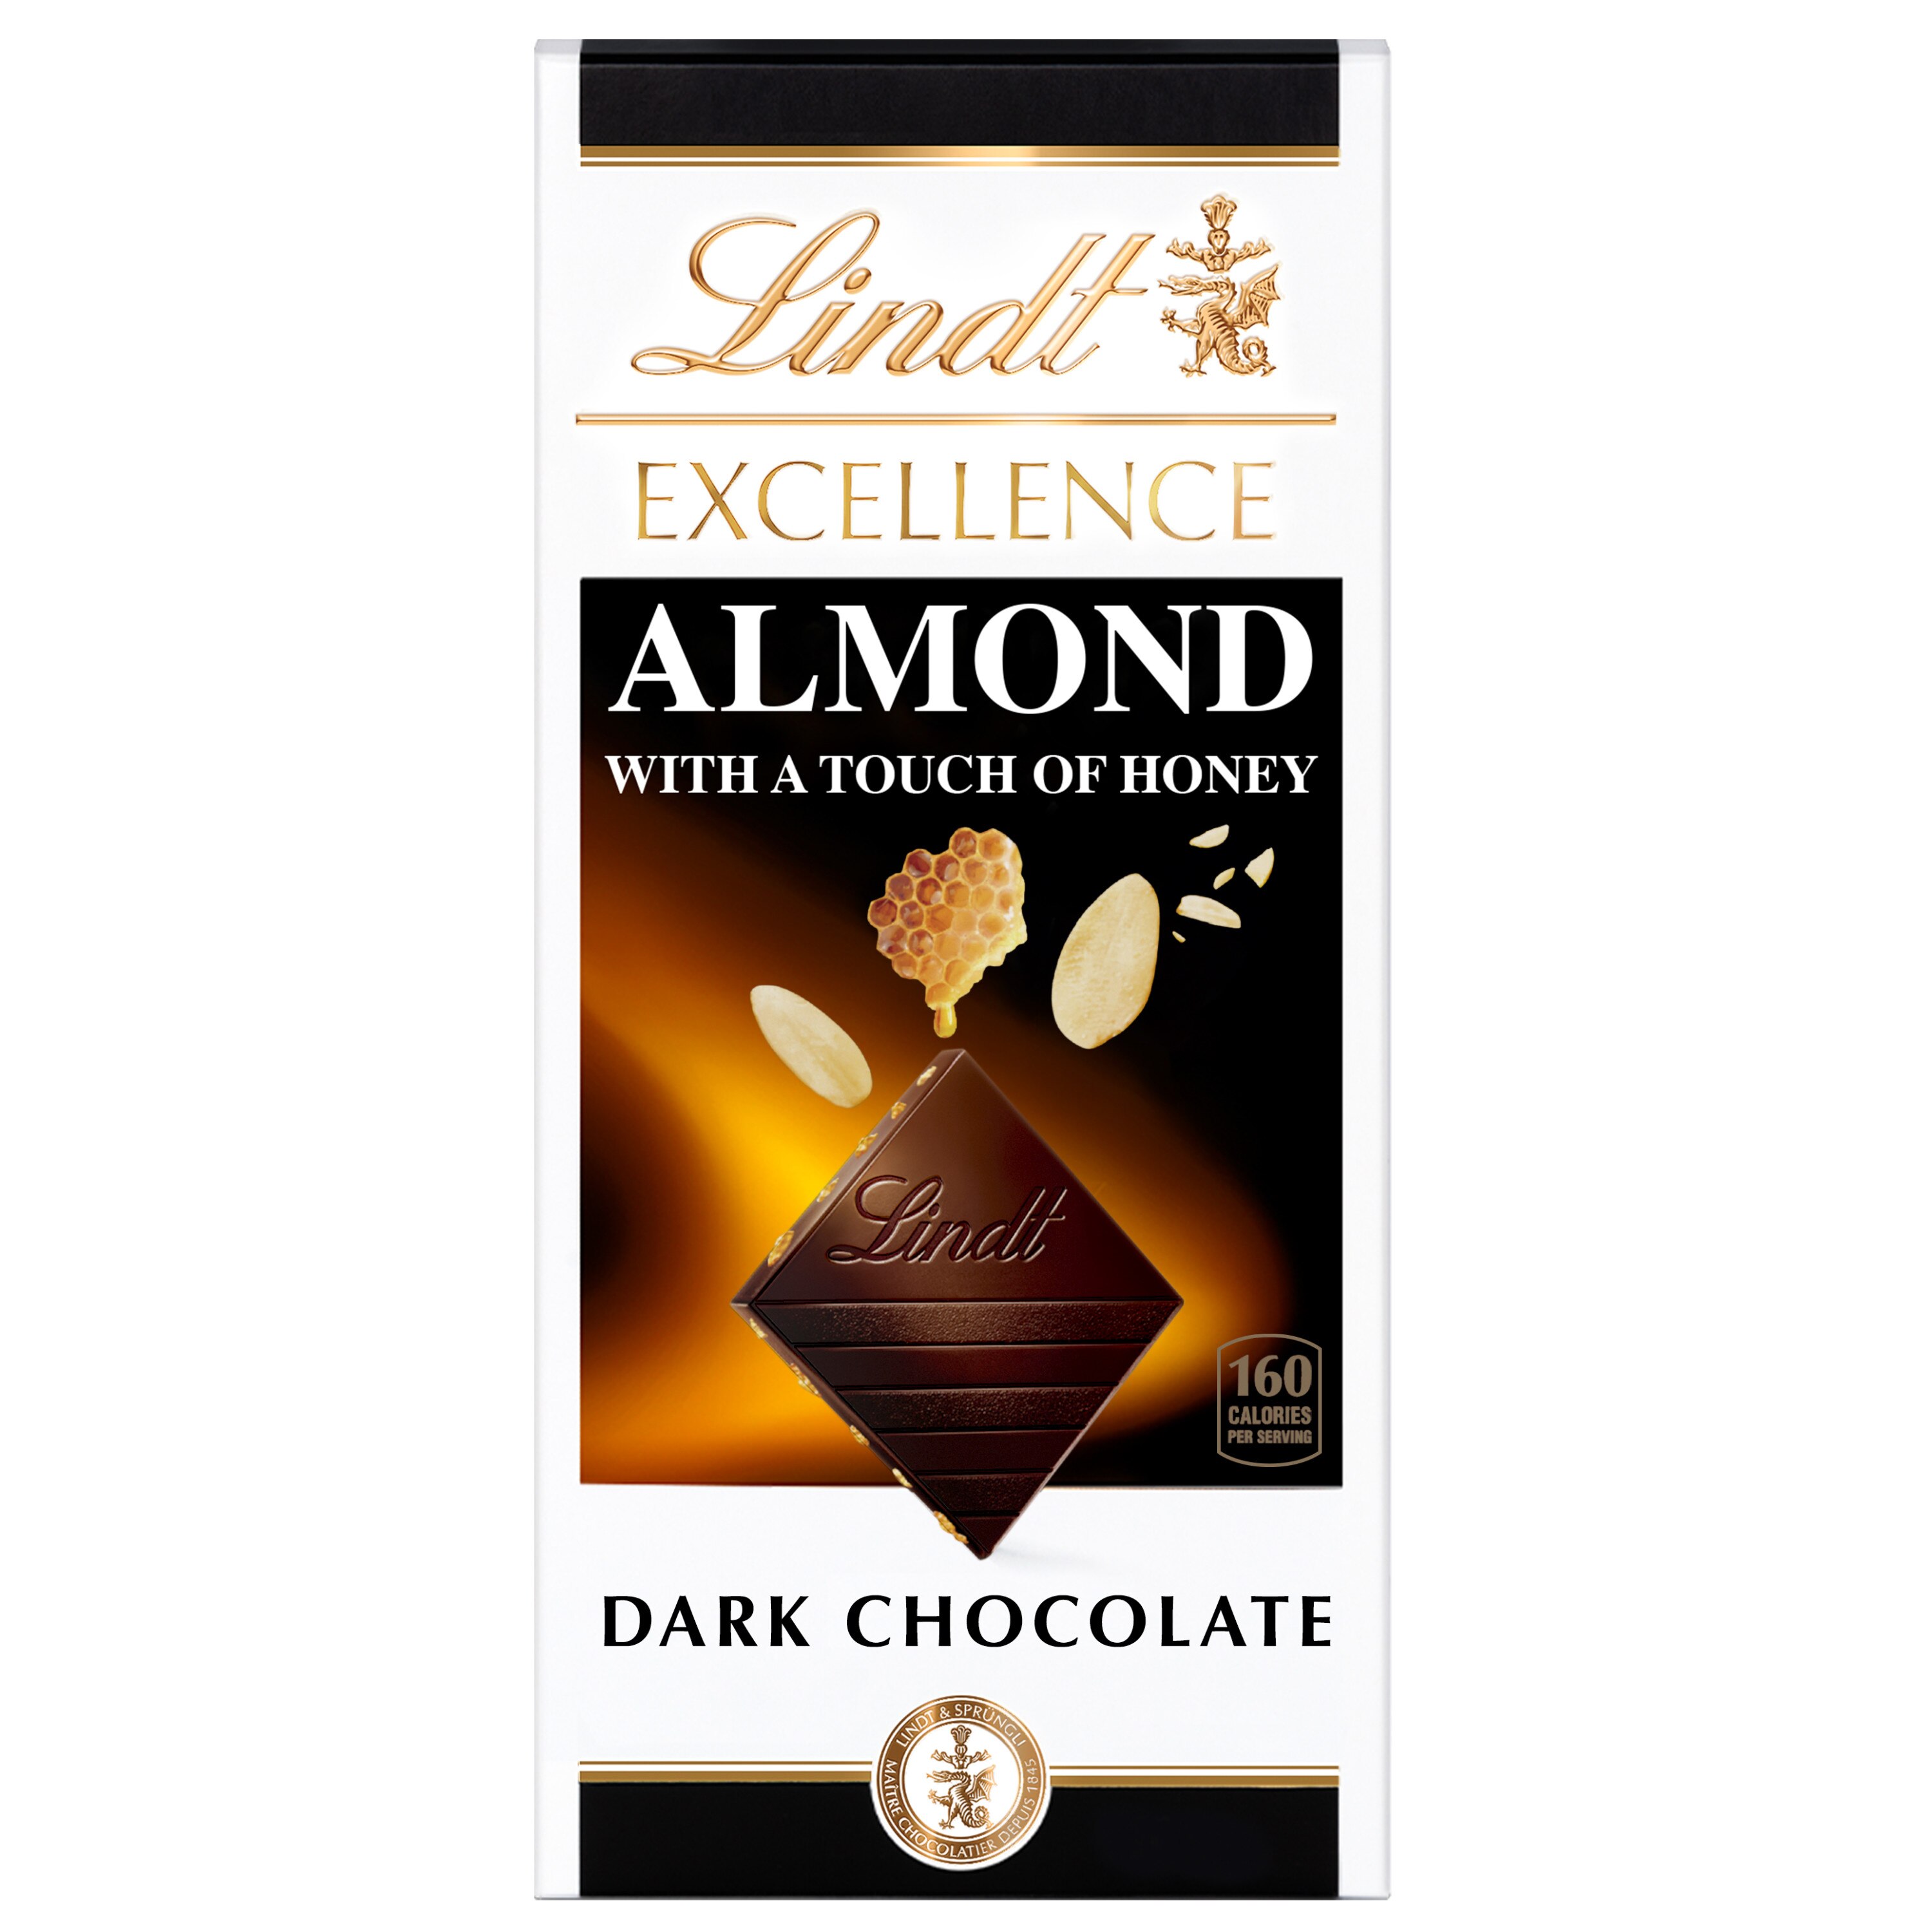 Lindt Excellence Almond with a Touch of Honey Dark Chocolate Candy Bar, 3.5 oz